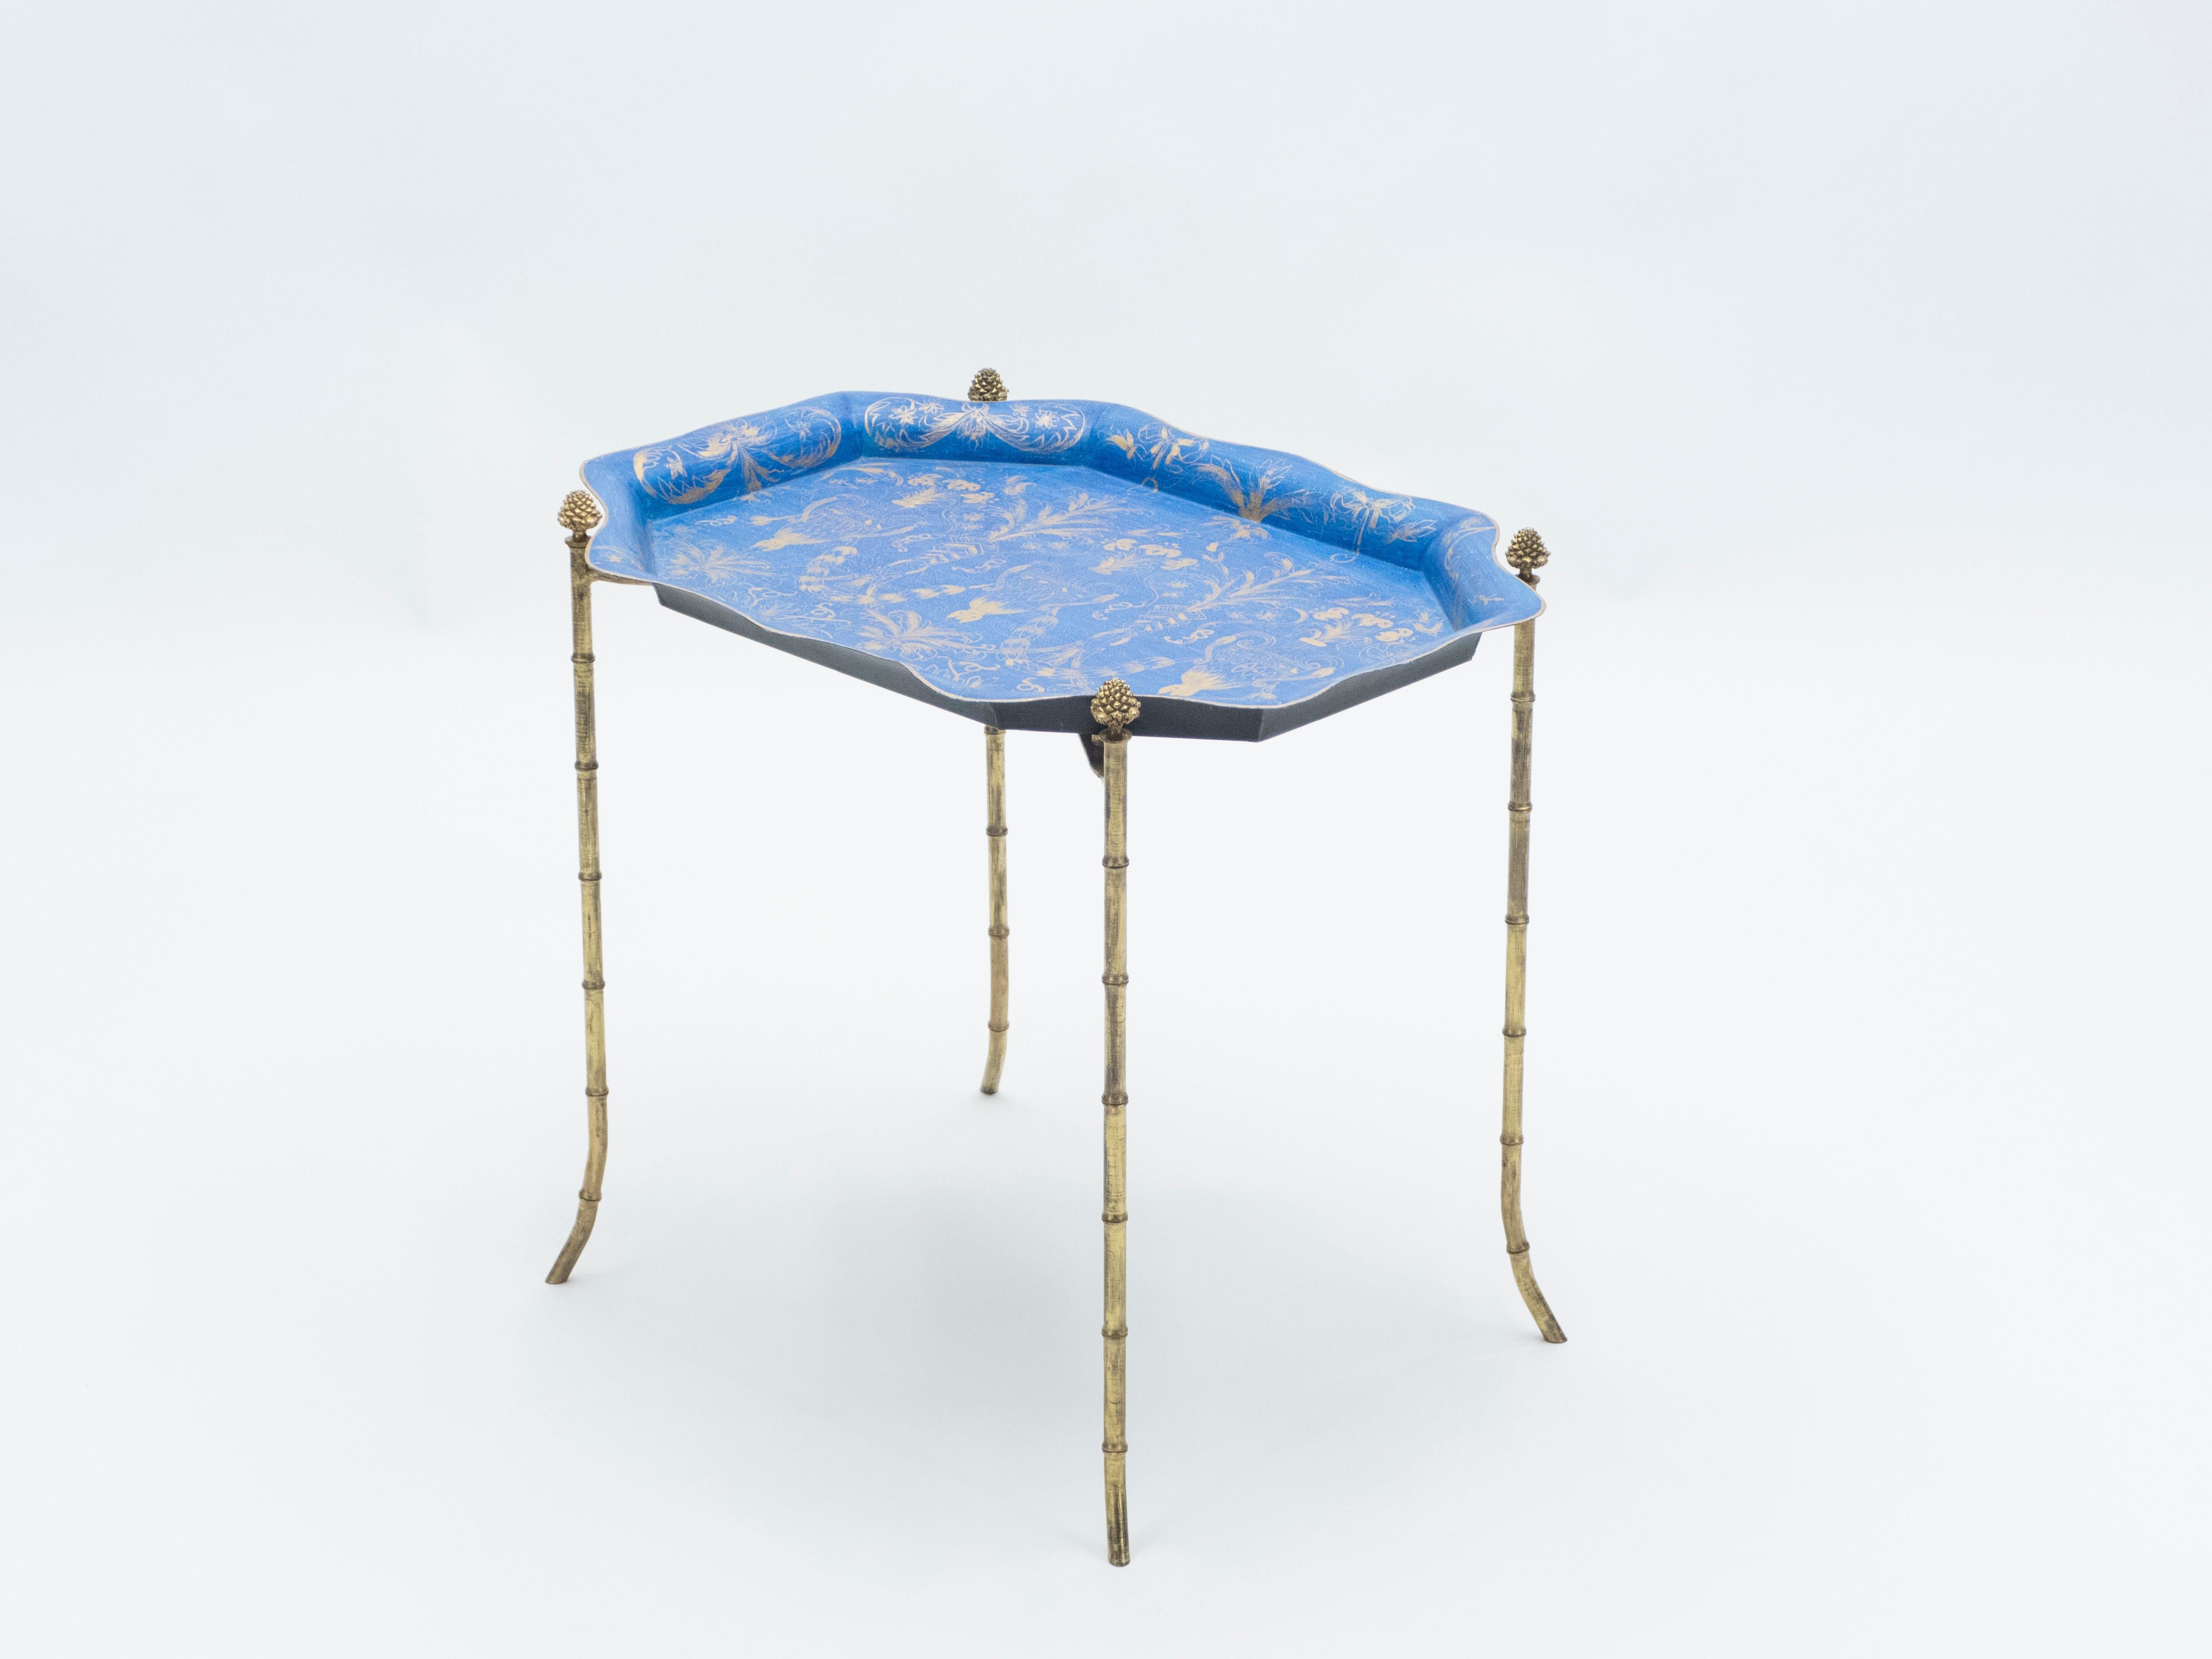 This Maison Baguès Paris tray table is a rare and unique piece from the 1960s. This table features typical french neoclassical pine cones, and beautiful old patina bronze bamboo feet. The tray is in royal blue painted iron with rich golden drawing